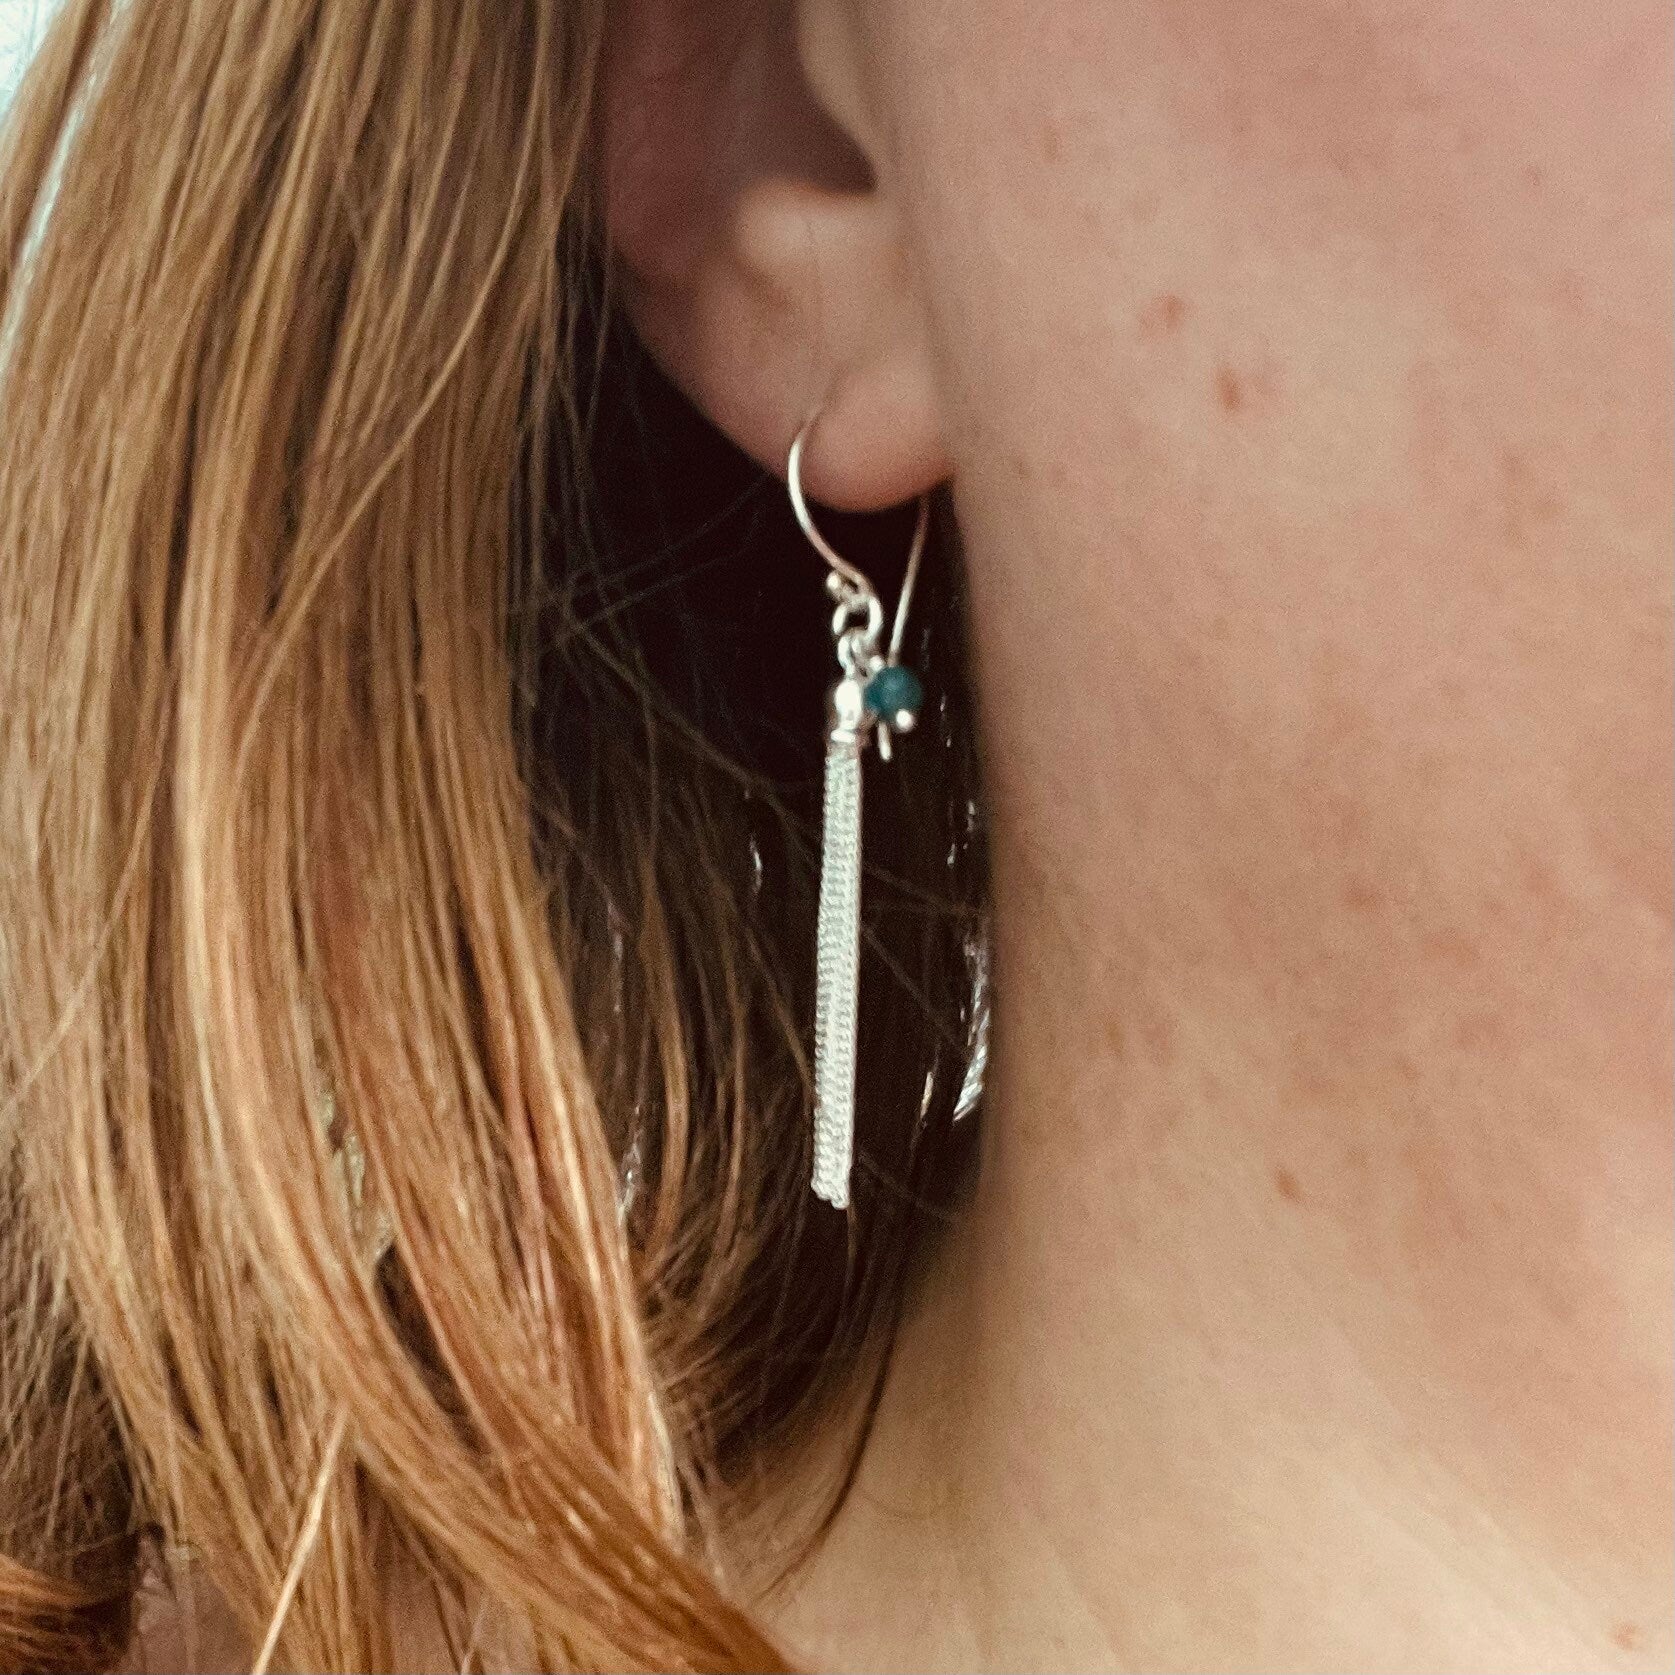 Silver Tassel Earrings with birthstone and 925 sterling silver